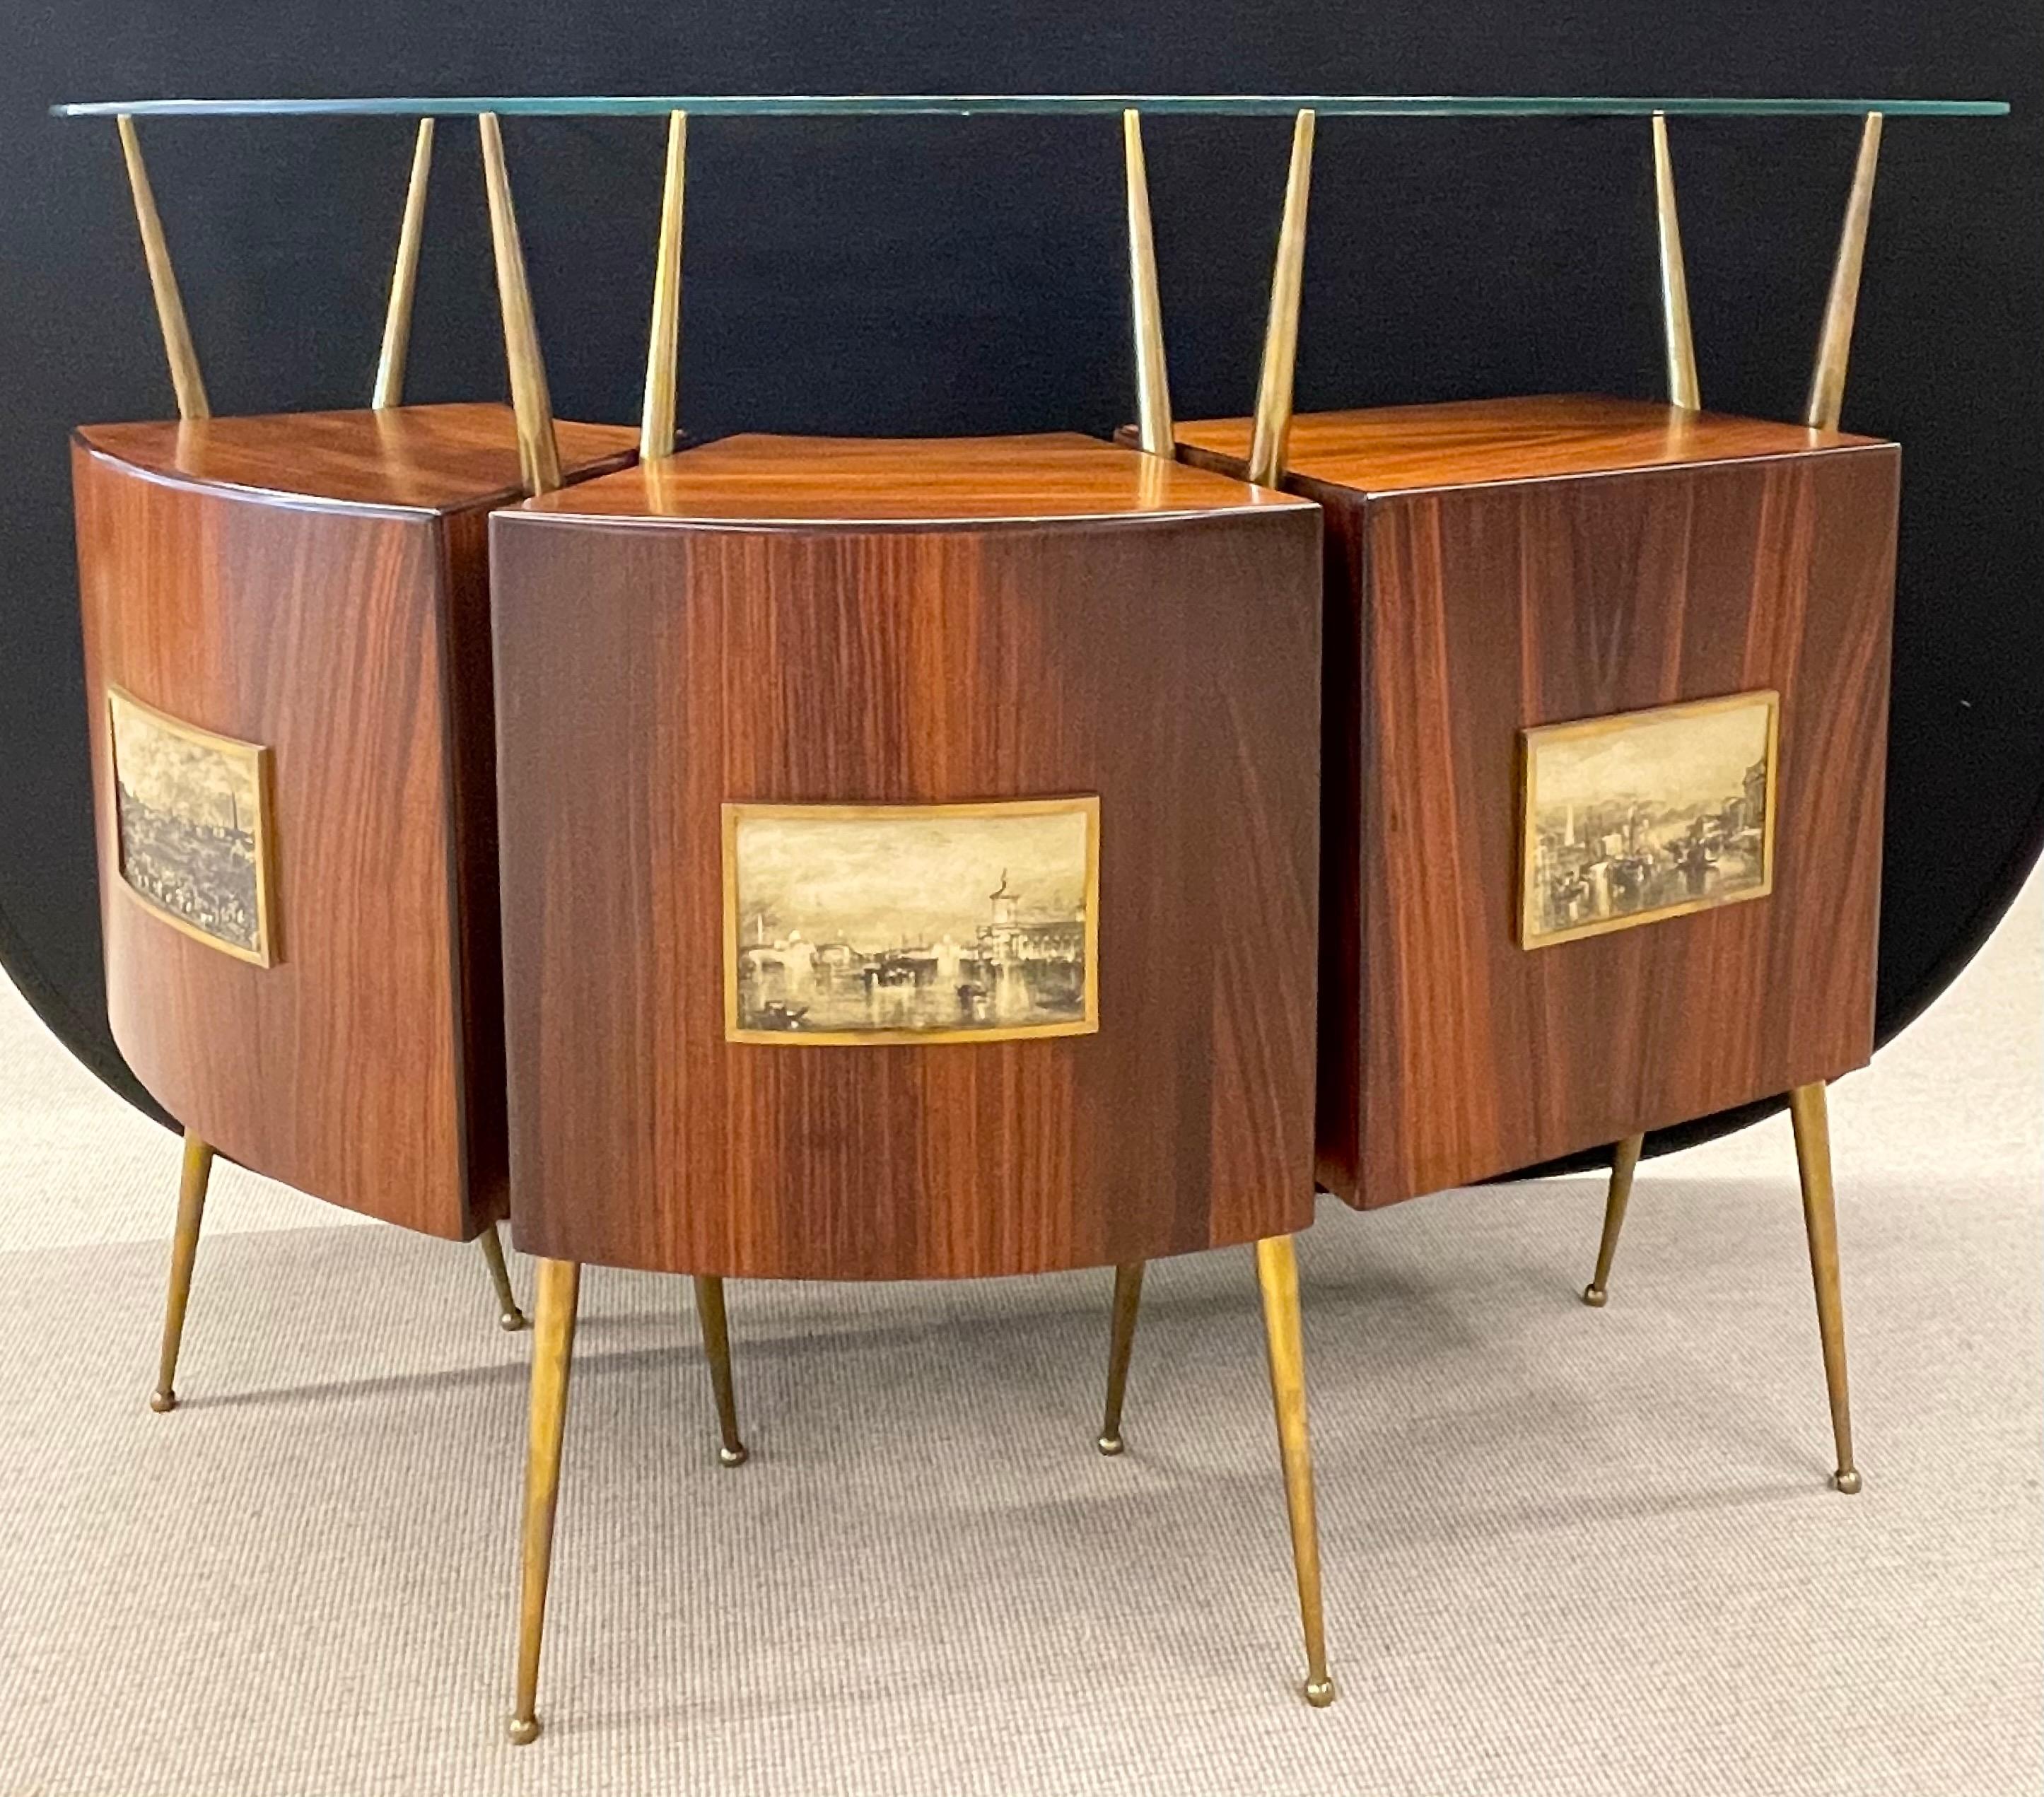 Modern dry bar in the style of Gio Ponti Italian rosewood dry bar Modern dry bar in the style of Gio Ponti 
45 1/2 x 56 x 14 inches with three cabinets, sculpted brass legs, glass top, and photo inlays, c. 1950.